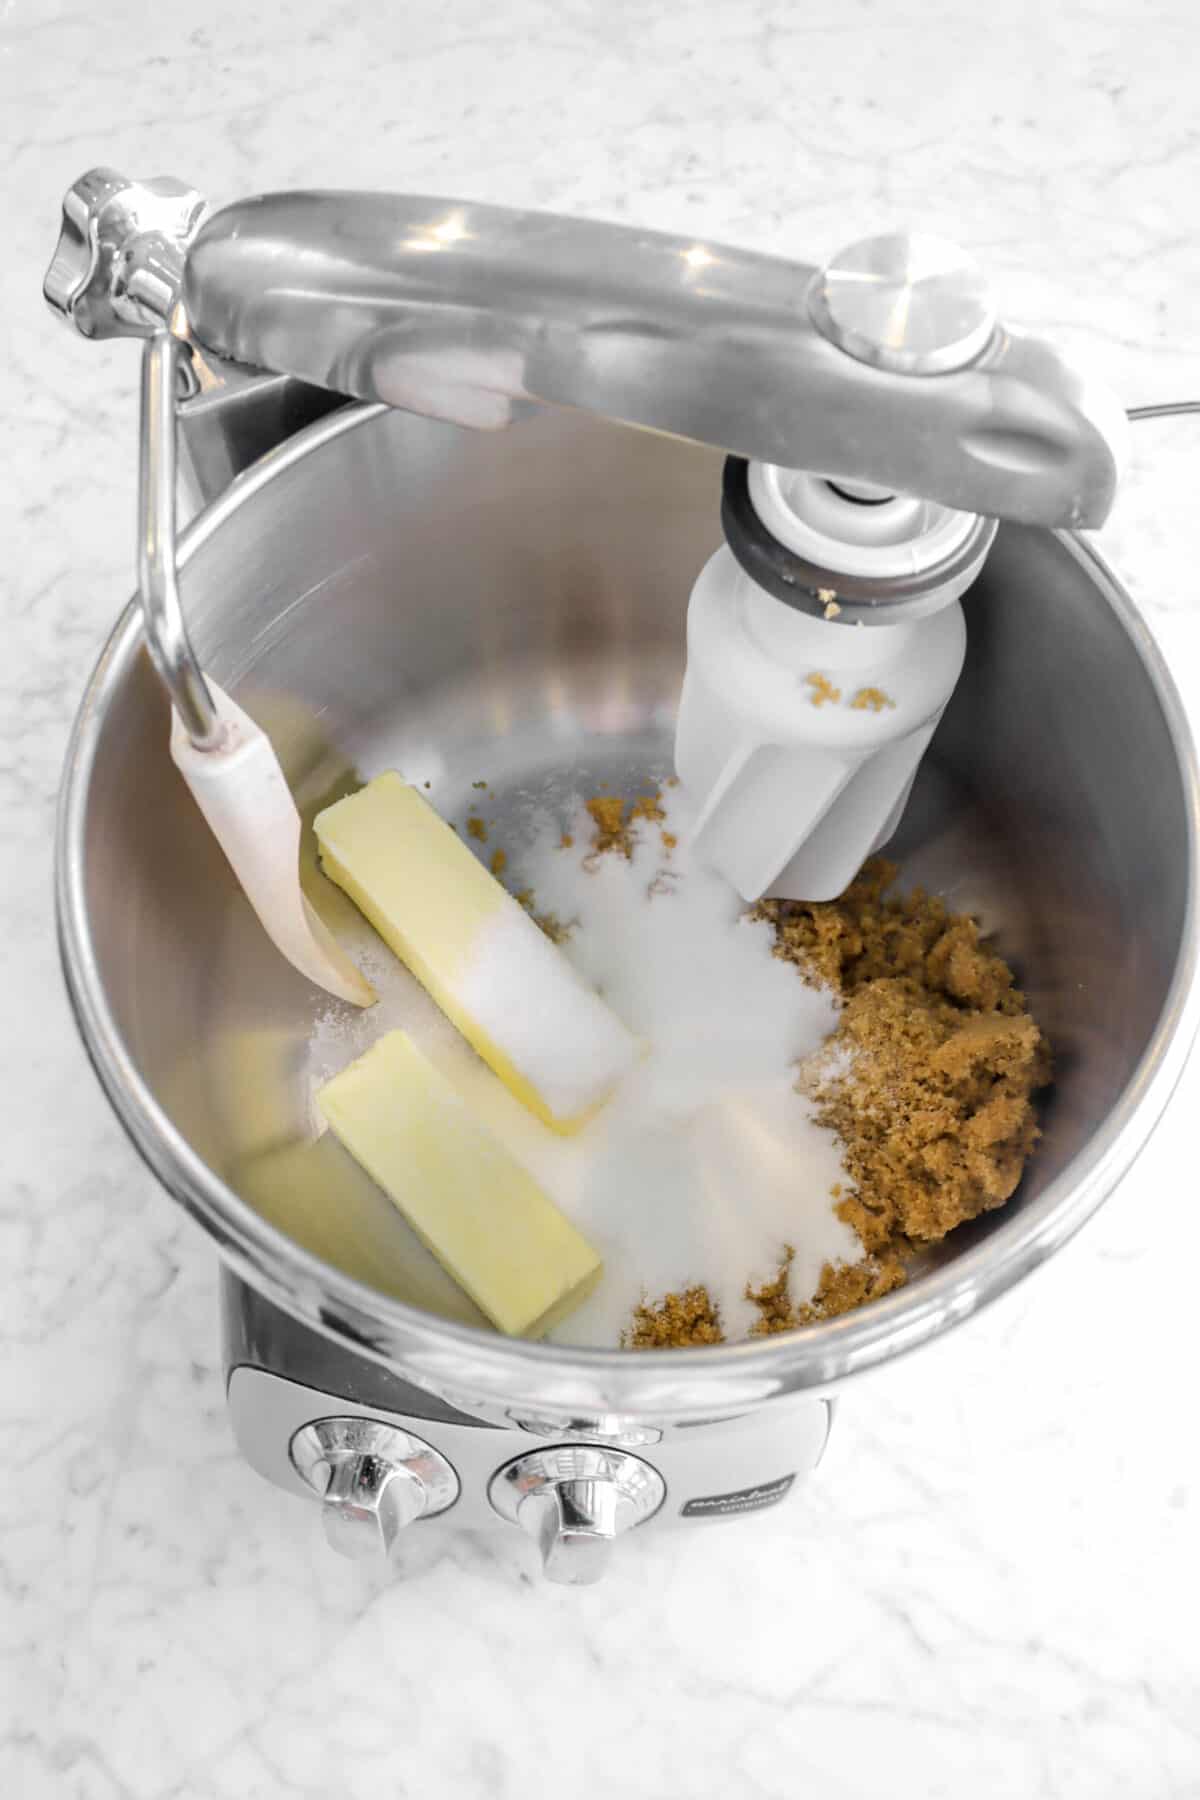 two sticks of butter, white sugar, and brown sugar in a mixer